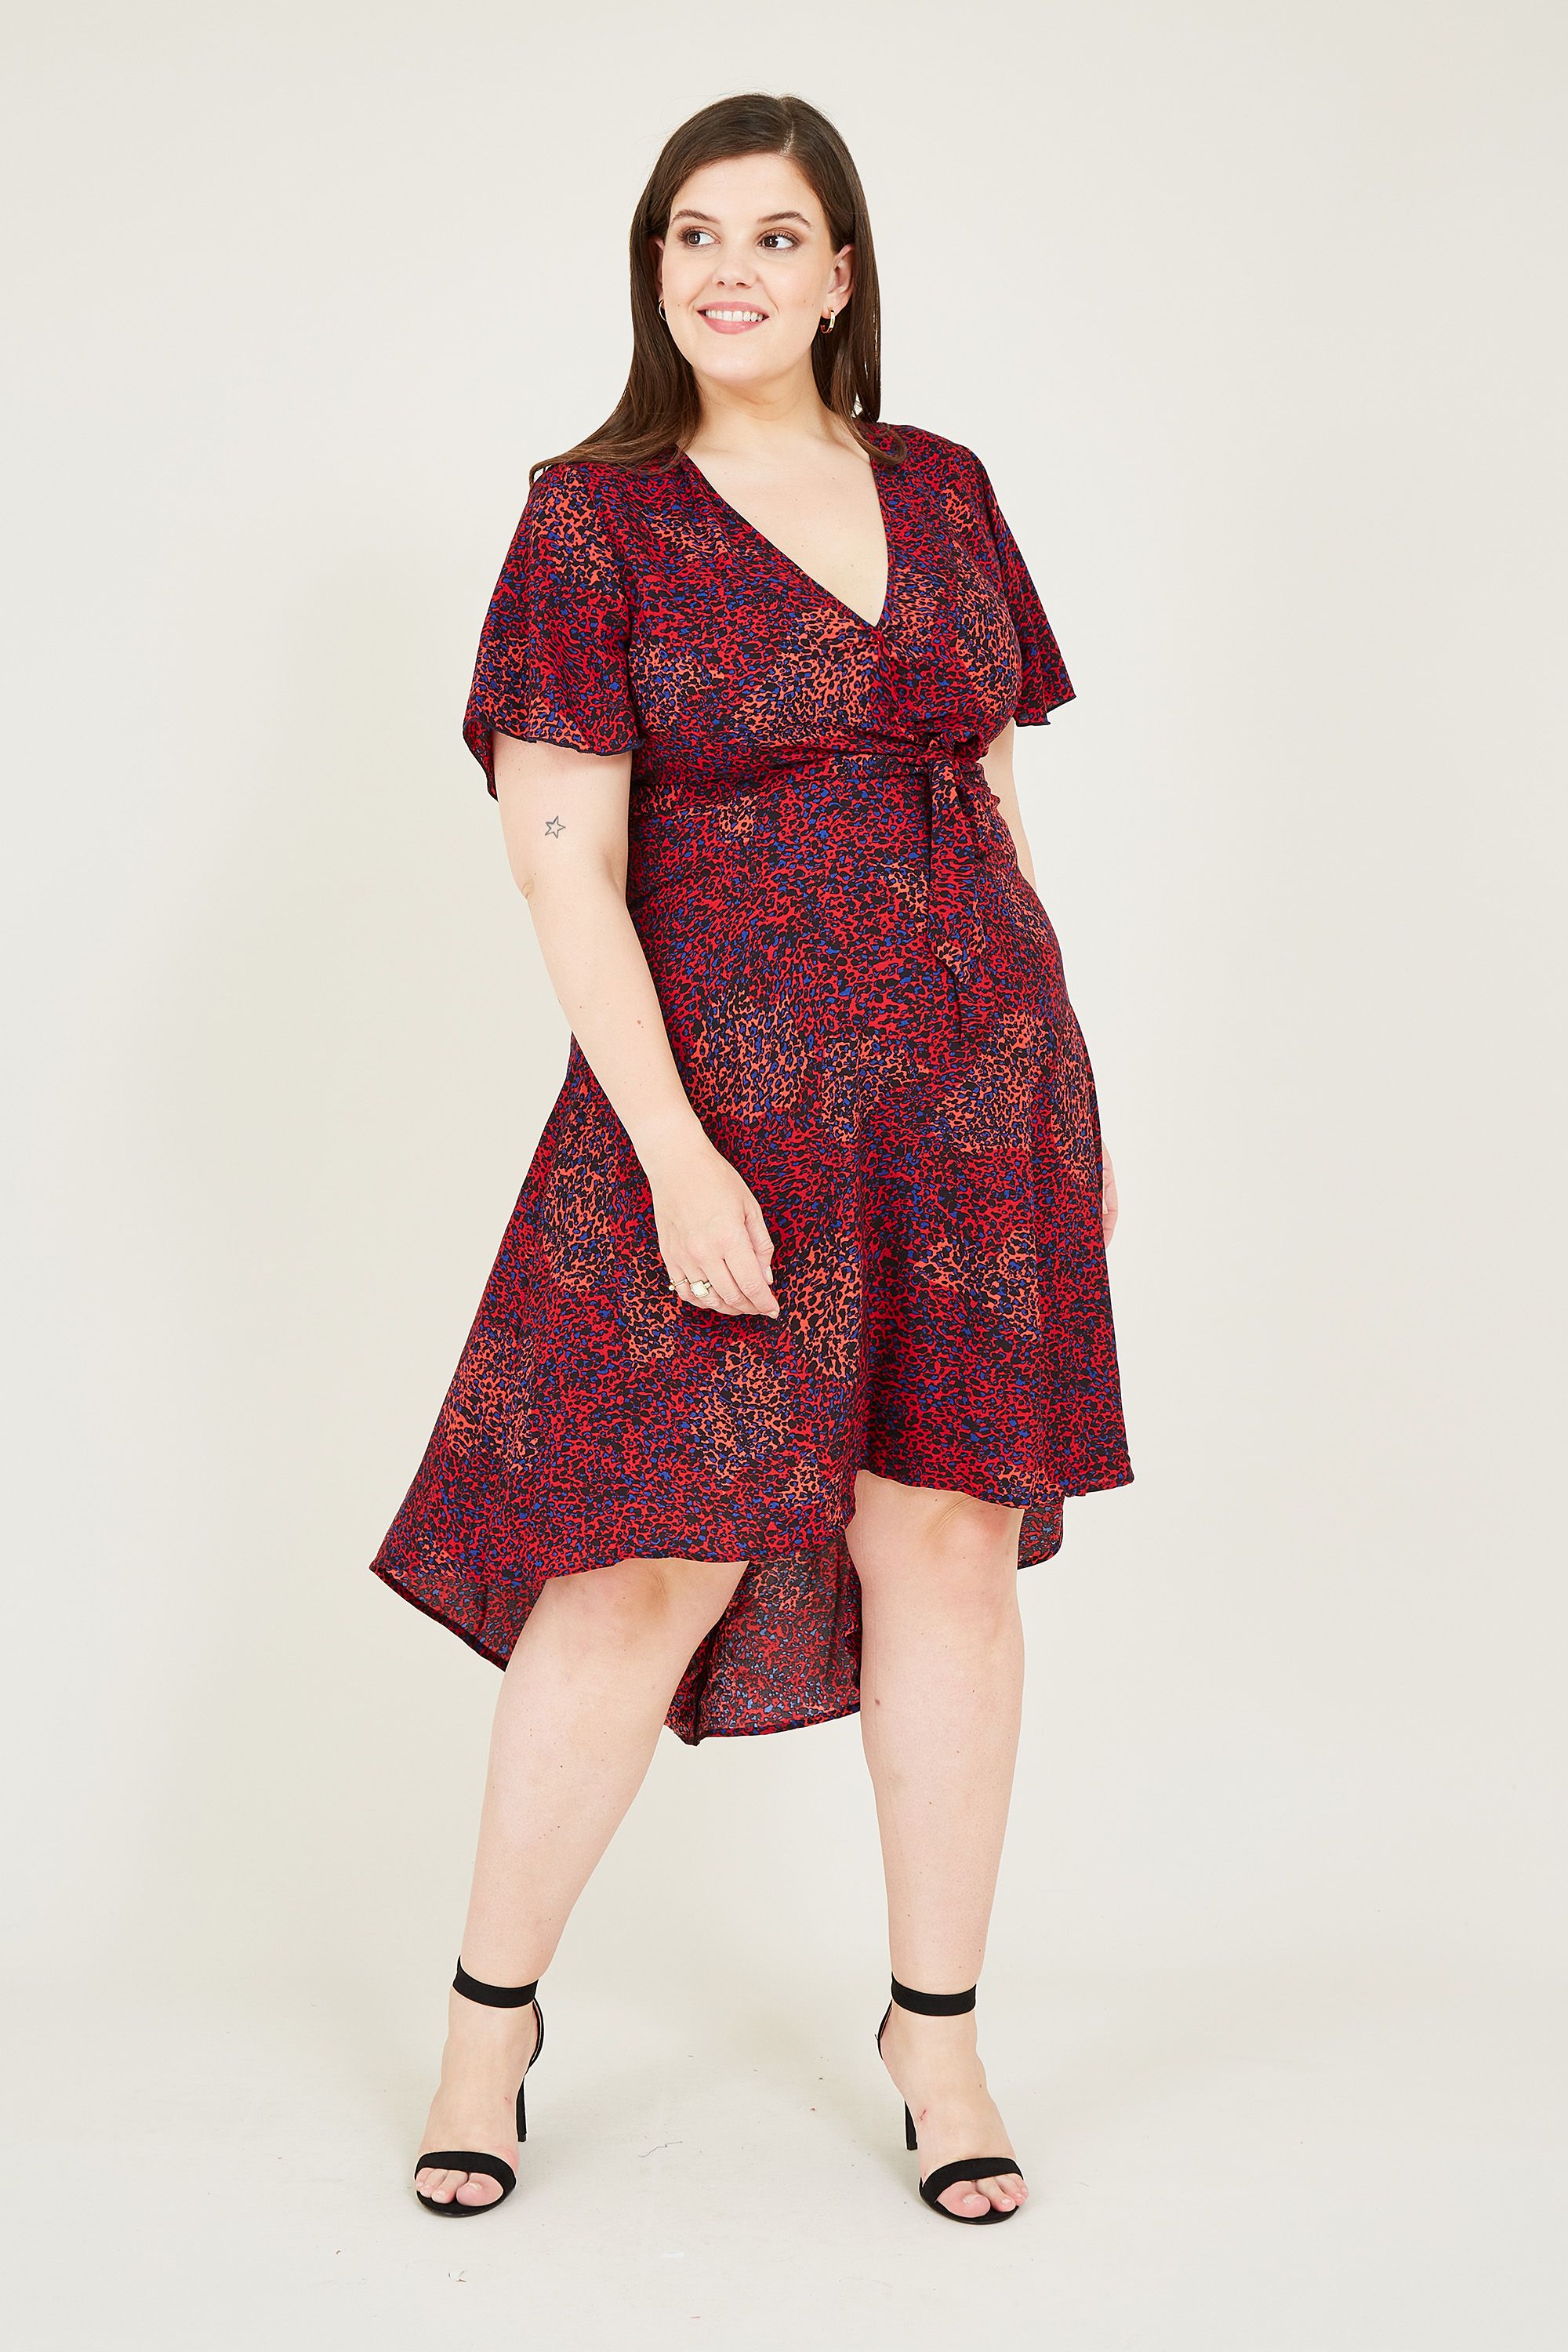 Go wild for this Mela Plus Size Animal Wrap Dress, perfect for dressing up and down. Featuring lightweight fabric printed with a leopard design, it's framed by a V-neckline and a self-tie waist. With an enhancing asymmetric hemline and flippy sleeves, team with heels for those all-important occasions.